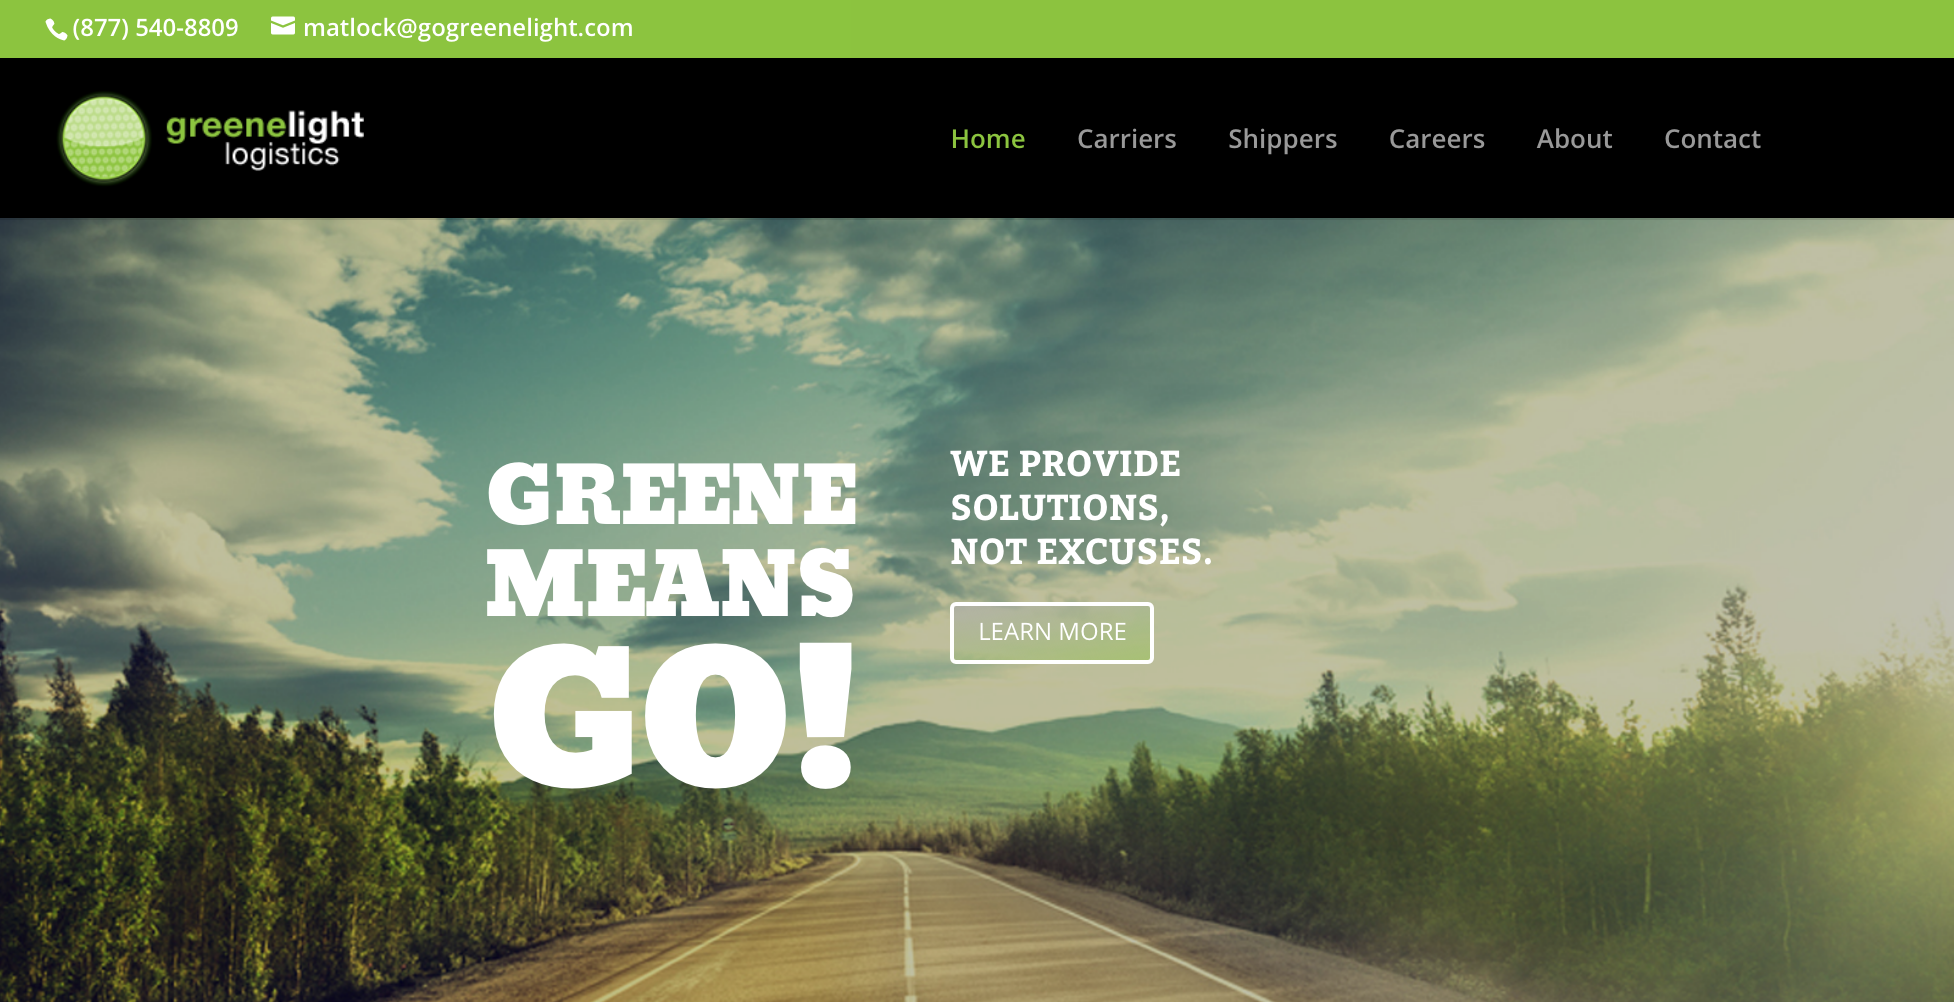 The homepage of the Greenelight Logistics website, published to: 